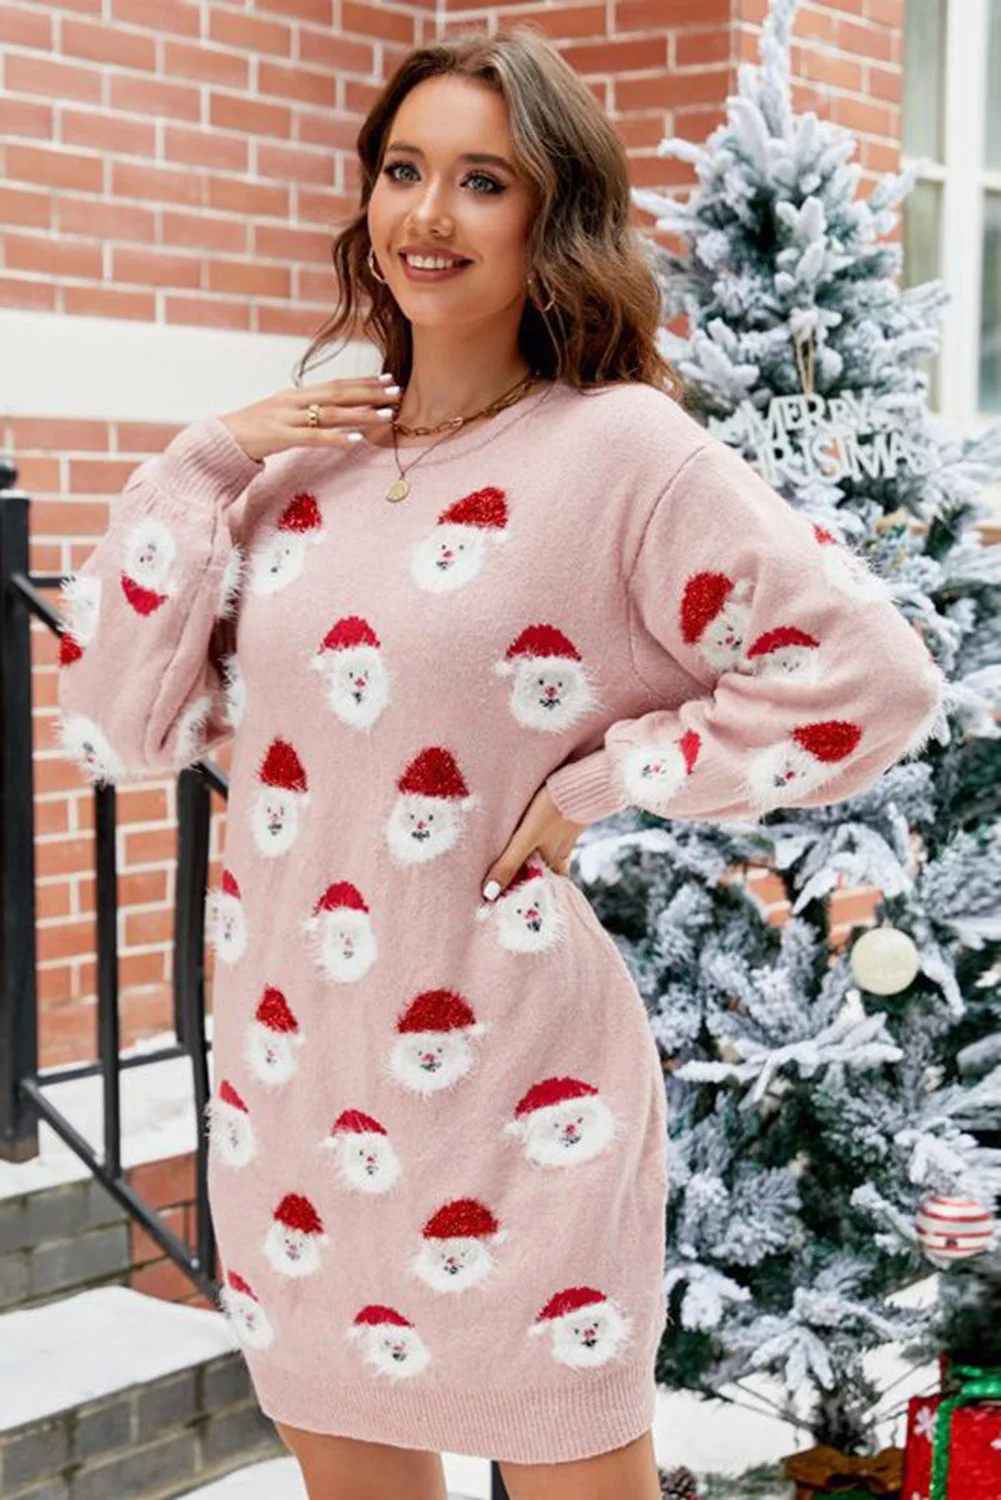 Dear-Lover Light Pink Fuzzy Christmas Santa Clause Sweater Christmas Dress For Women